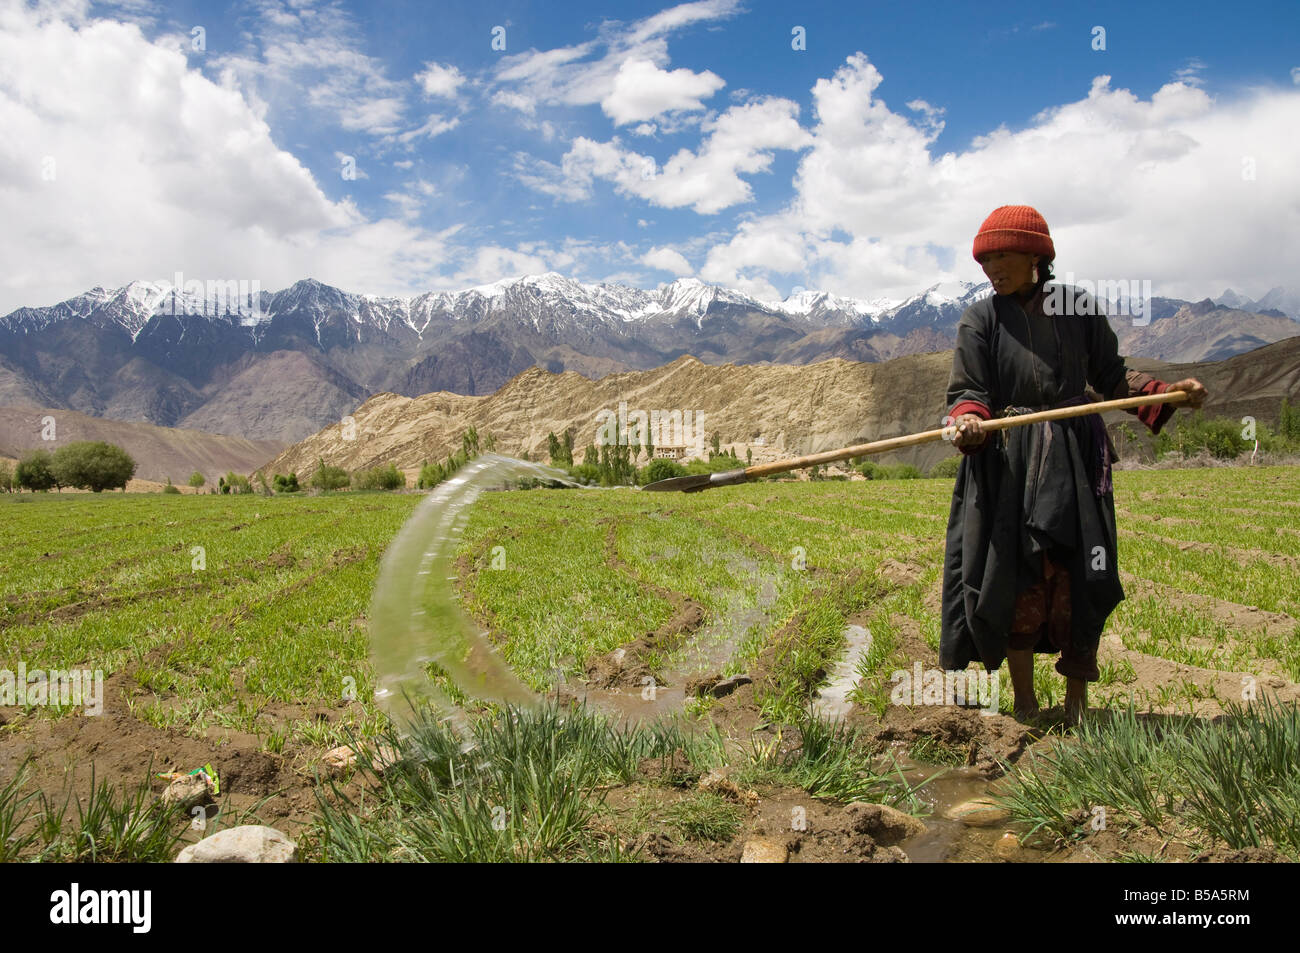 Local woman irrigating her crop in field with mountains in background, Likir, Ladakh, India Stock Photo